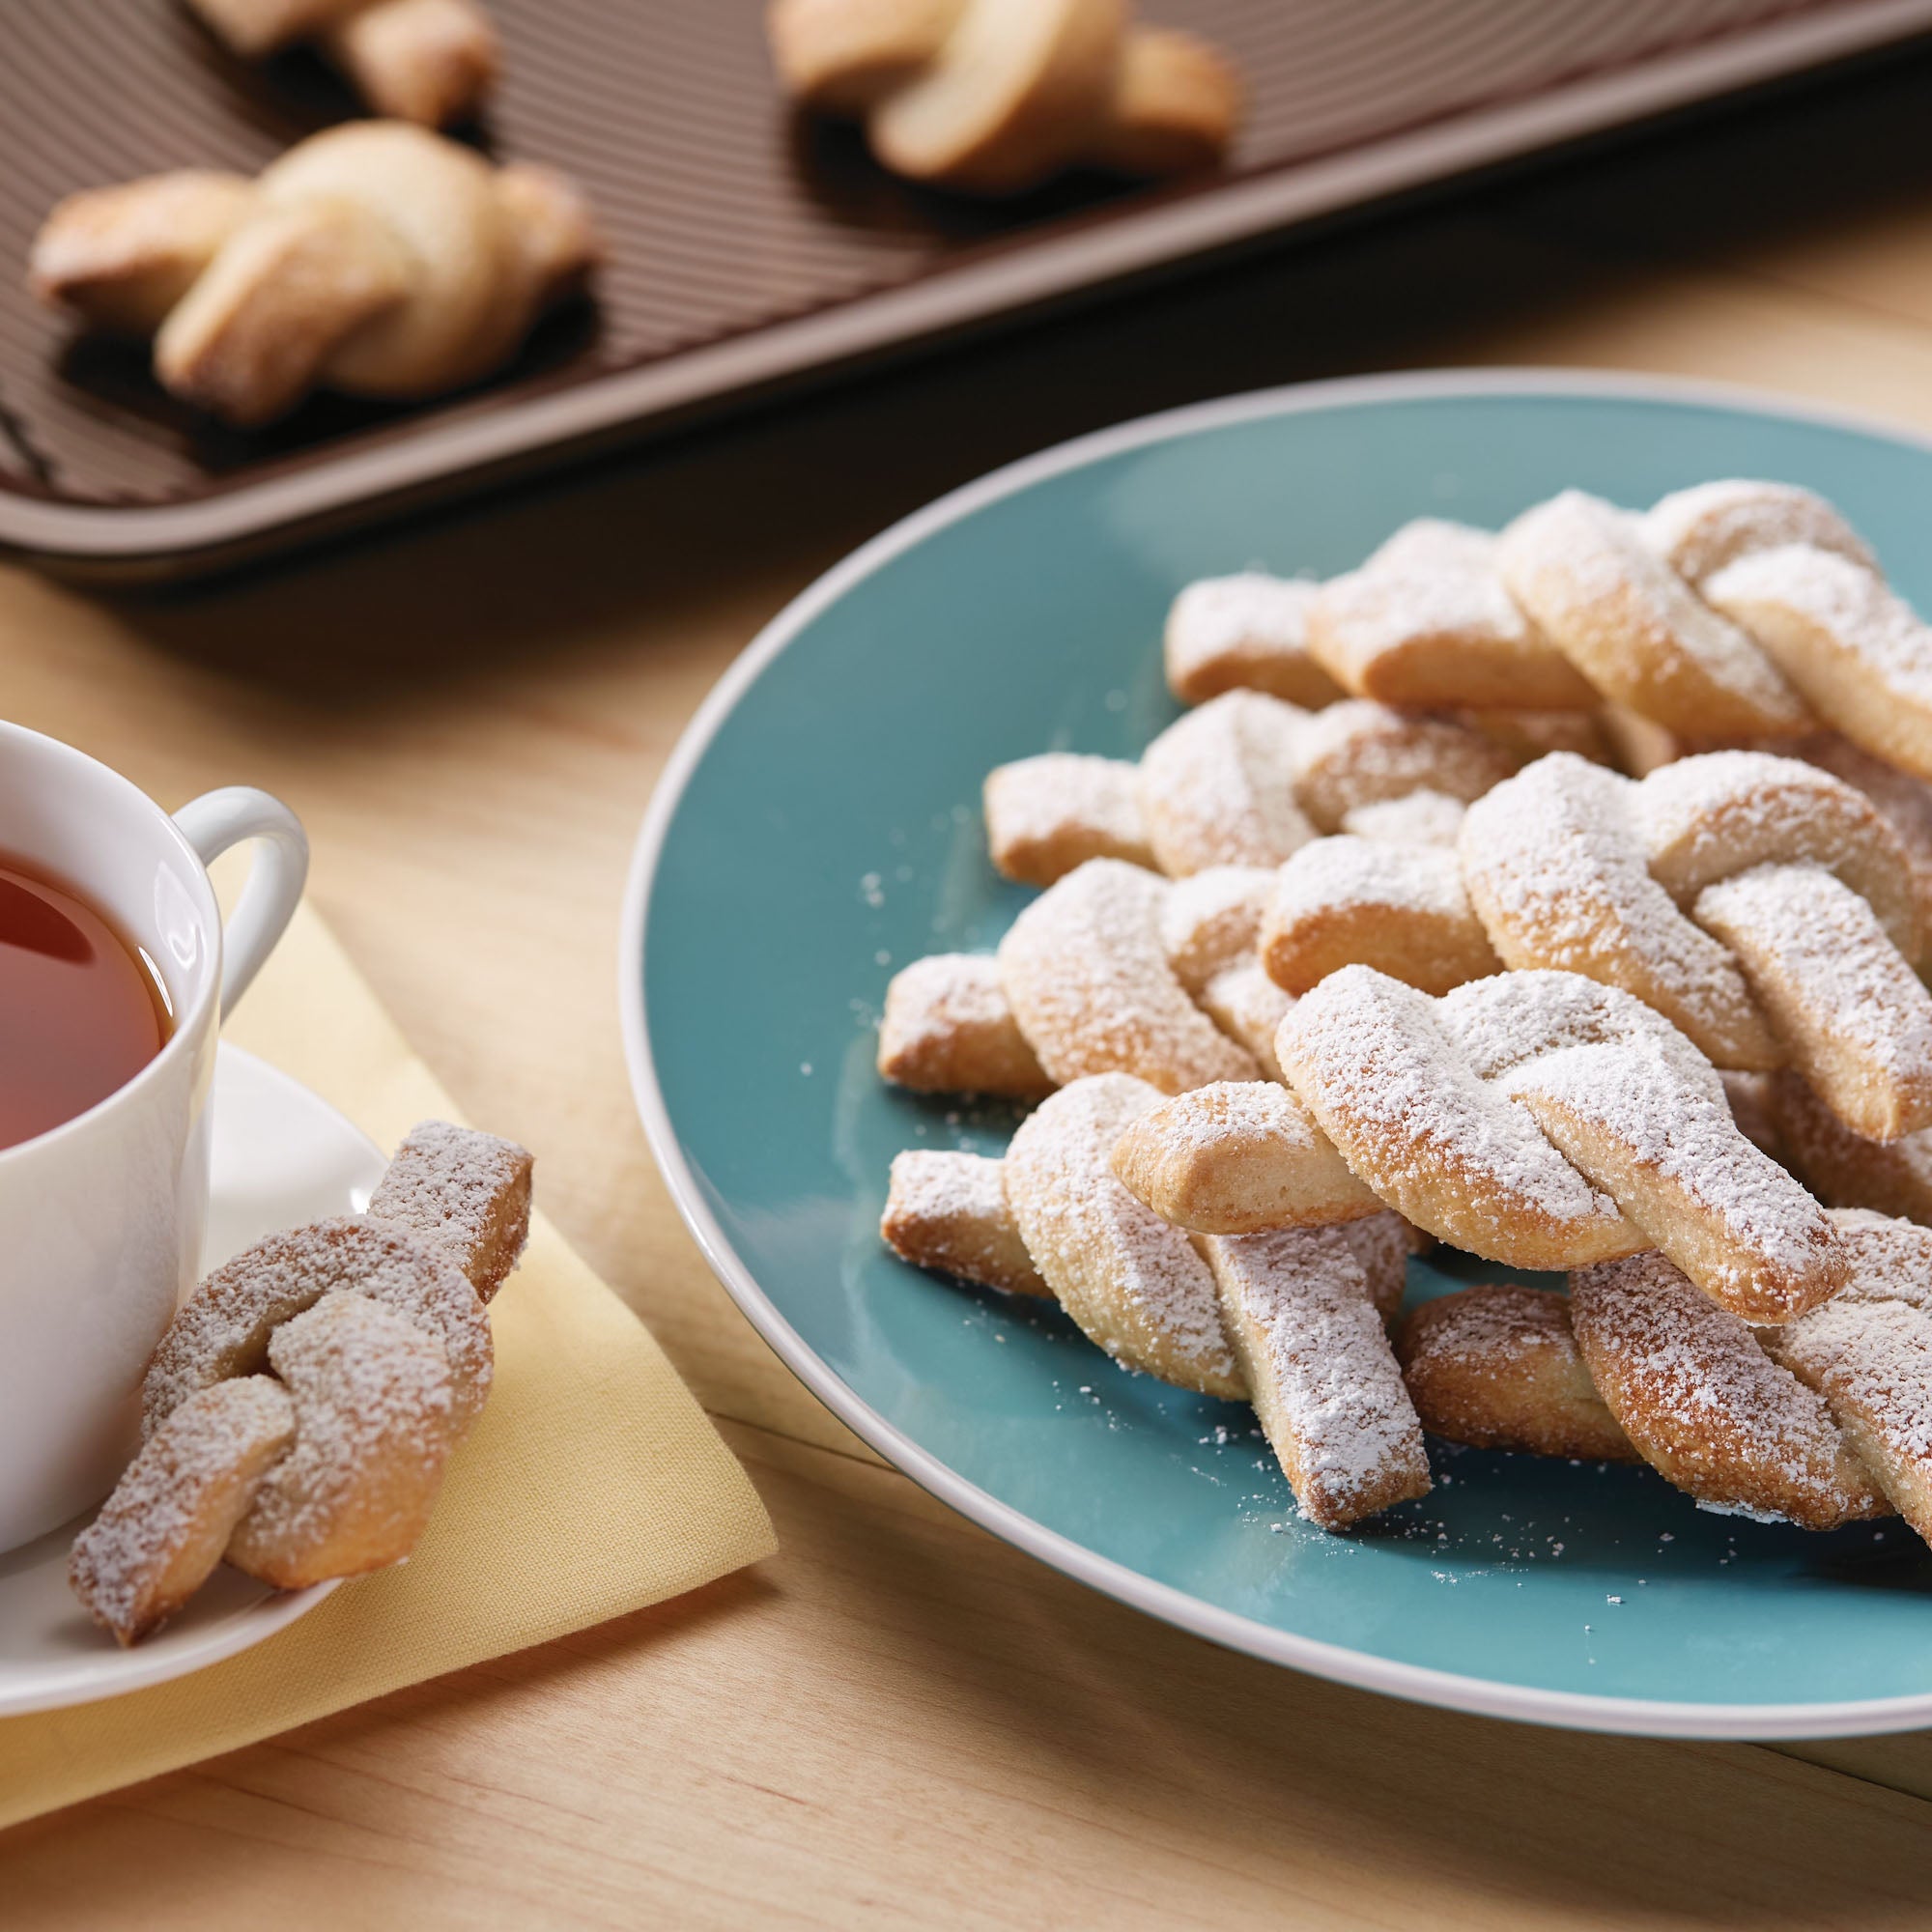 Knot cookies on a plate with tea